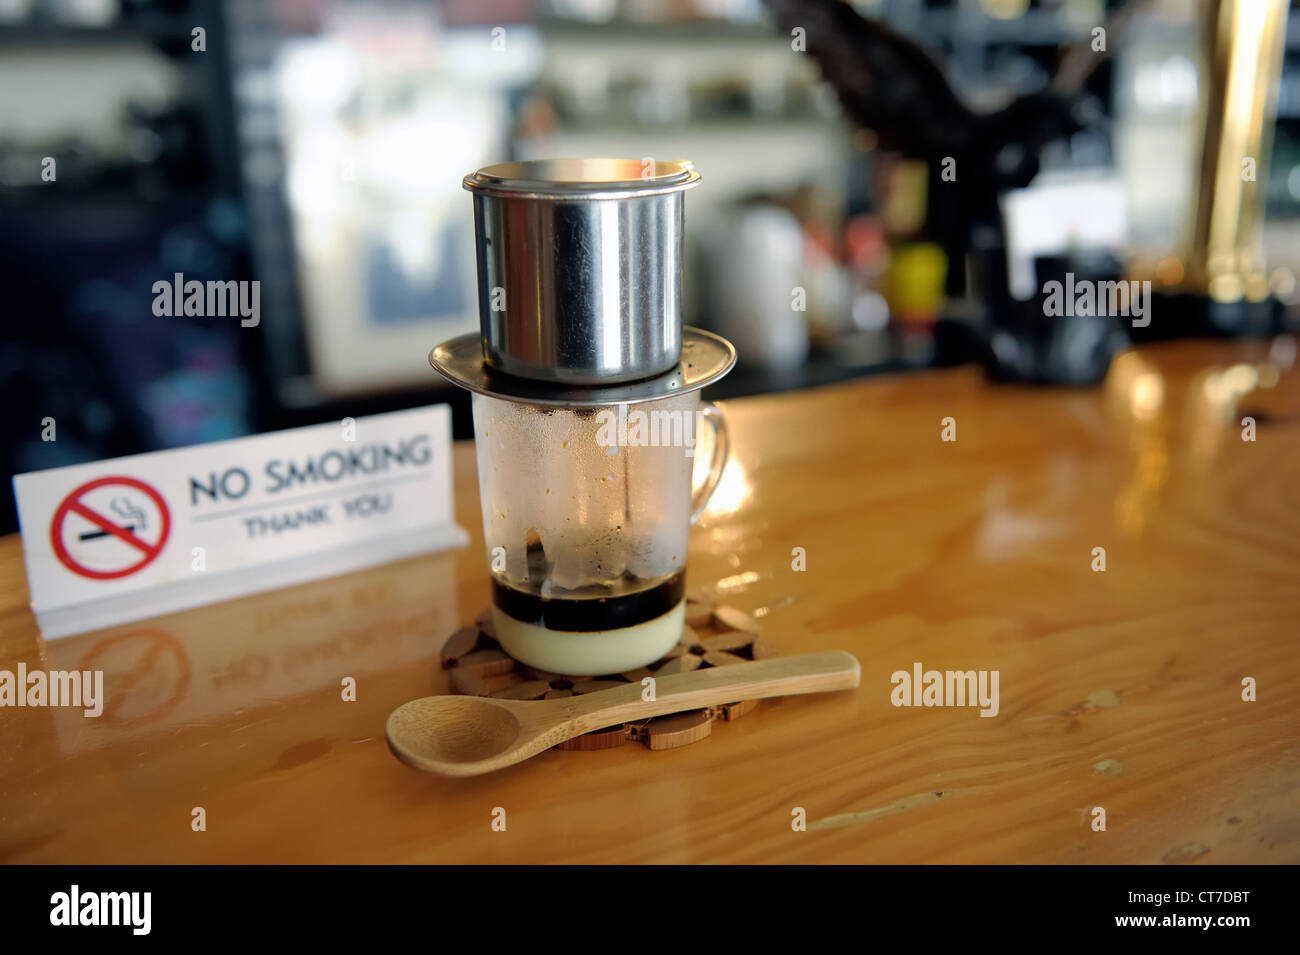 A local café in Okinawa, Japan proudly serves Vietnamese coffee while kindly asking patrons to refrain from smoking. Stock Photo